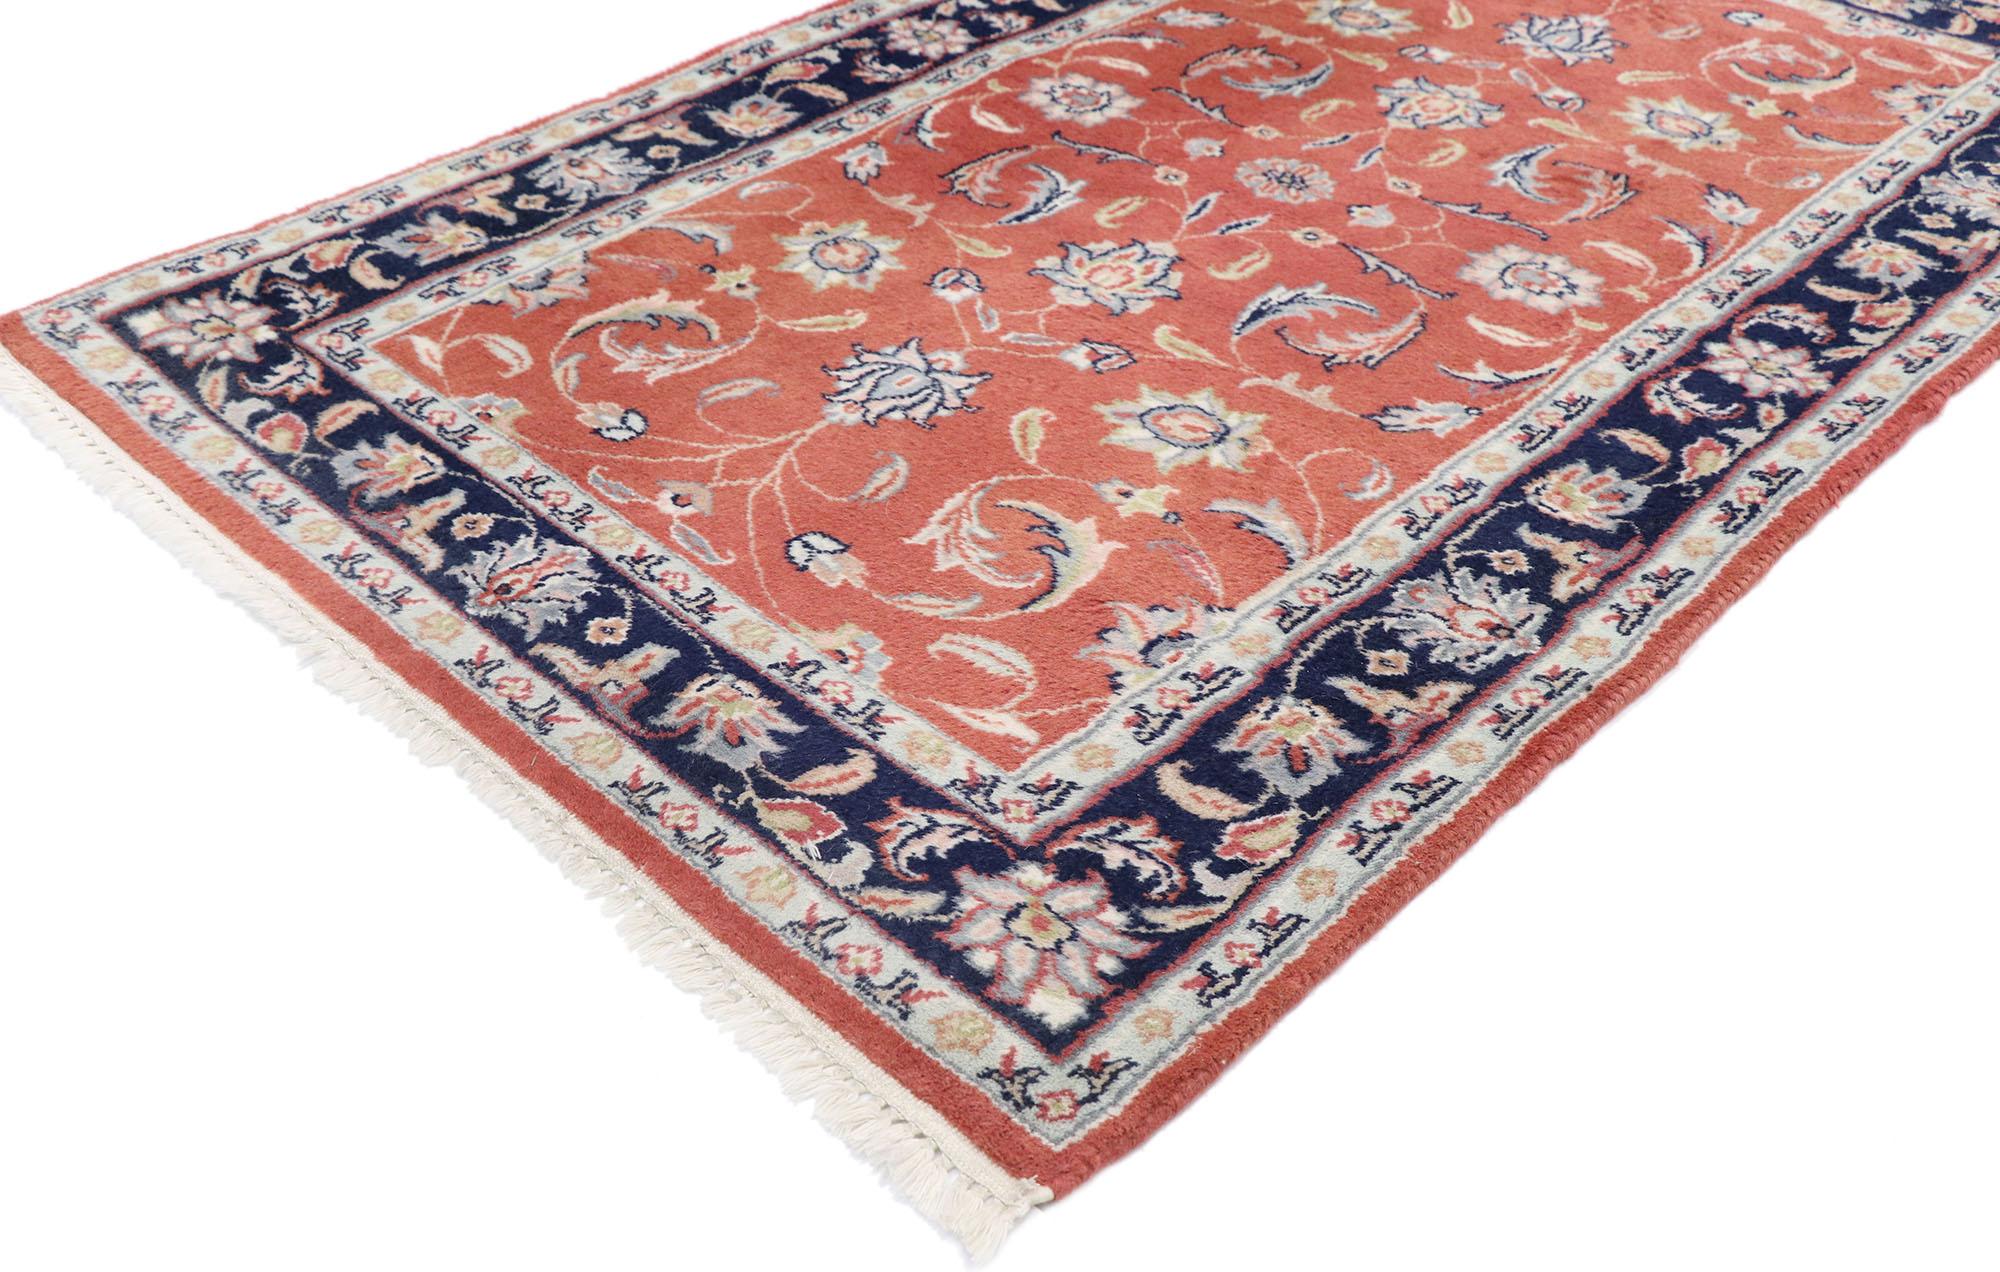 77602, vintage Persian Indian Rug with New England Cape Cod Cottage style. With a timeless design and defining colors, this hand-knotted wool vintage Persian Indian rug beautifully embodies a charming New England Cape Cod style. The abrashed red